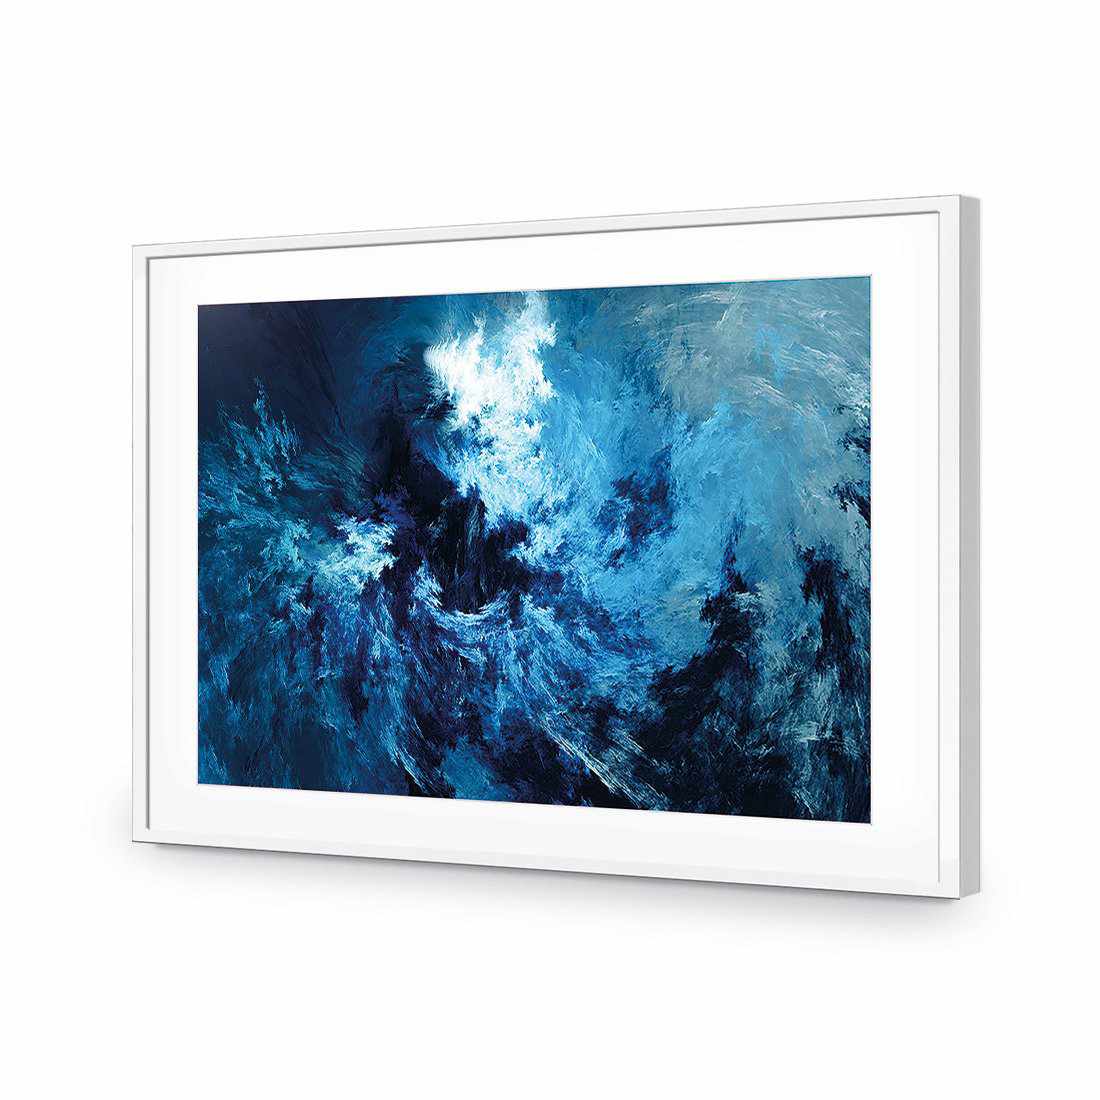 Into the Storm-Acrylic-Wall Art Design-With Border-Acrylic - White Frame-45x30cm-Wall Art Designs